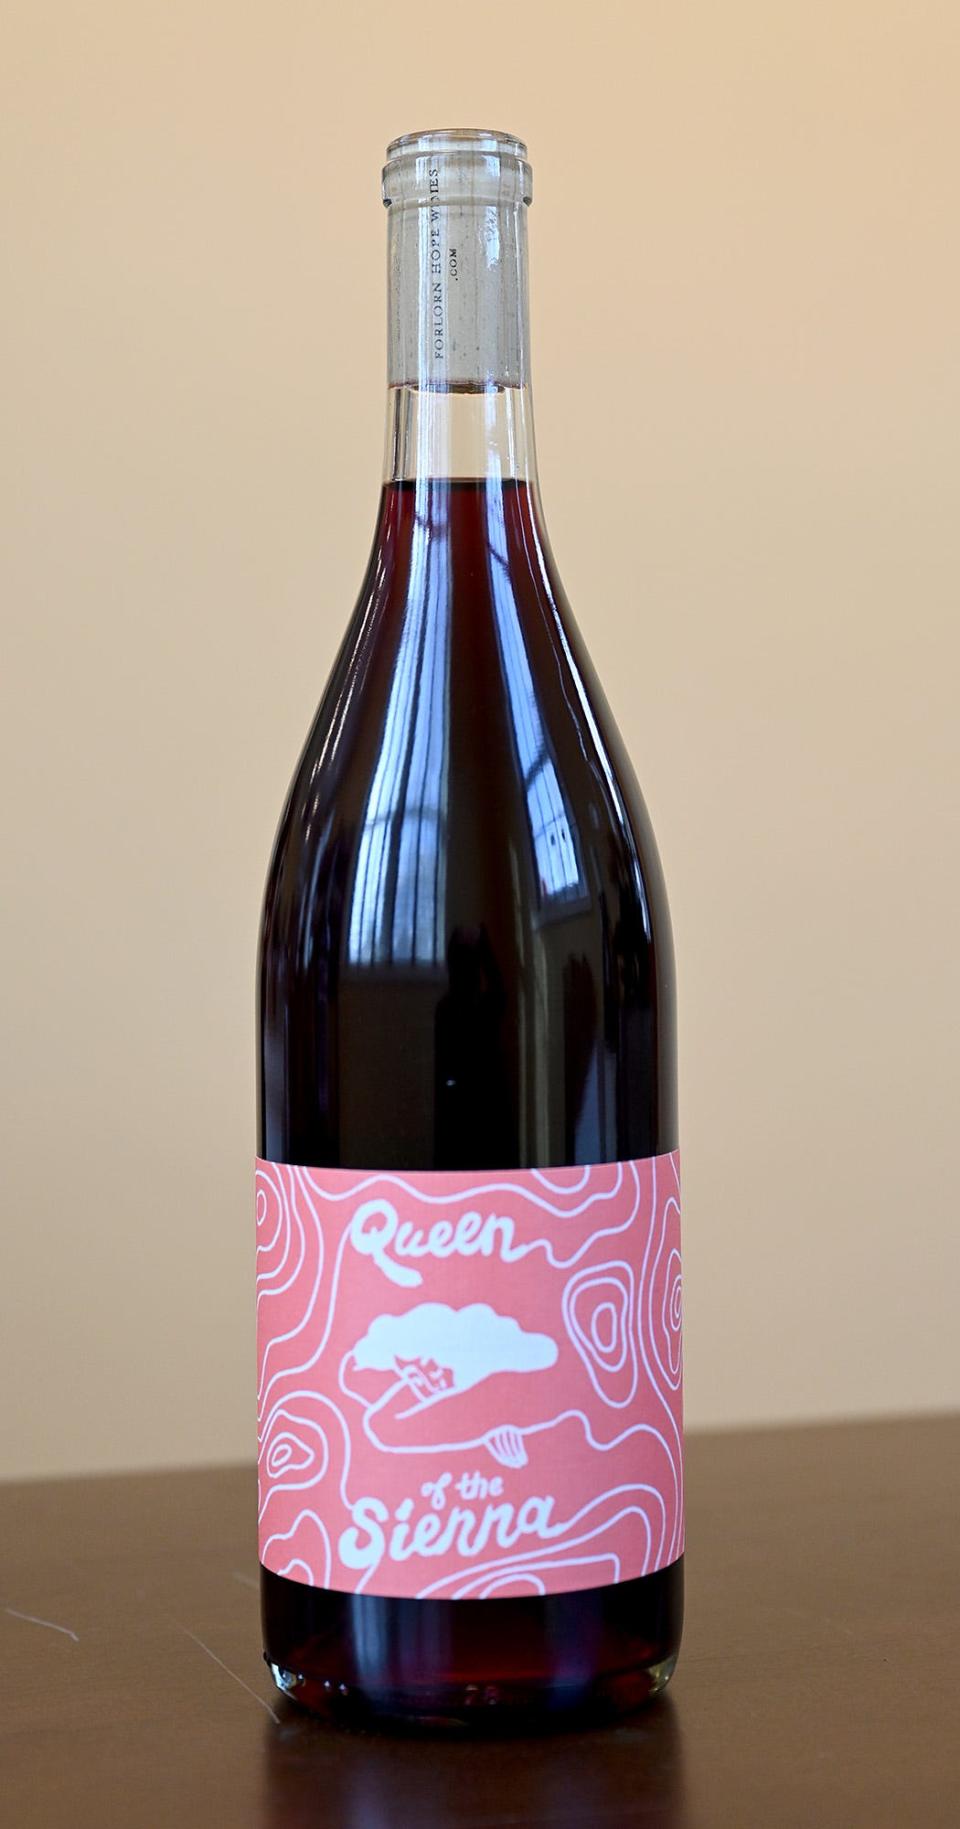 Forlorn Hope 2019 "Queen of the Sierra," a red wine that is a blend of Zinfandel and other grapes, at  Fiske & Main Specialty Wine and Cheese in Upton, Feb. 16, 2022. 